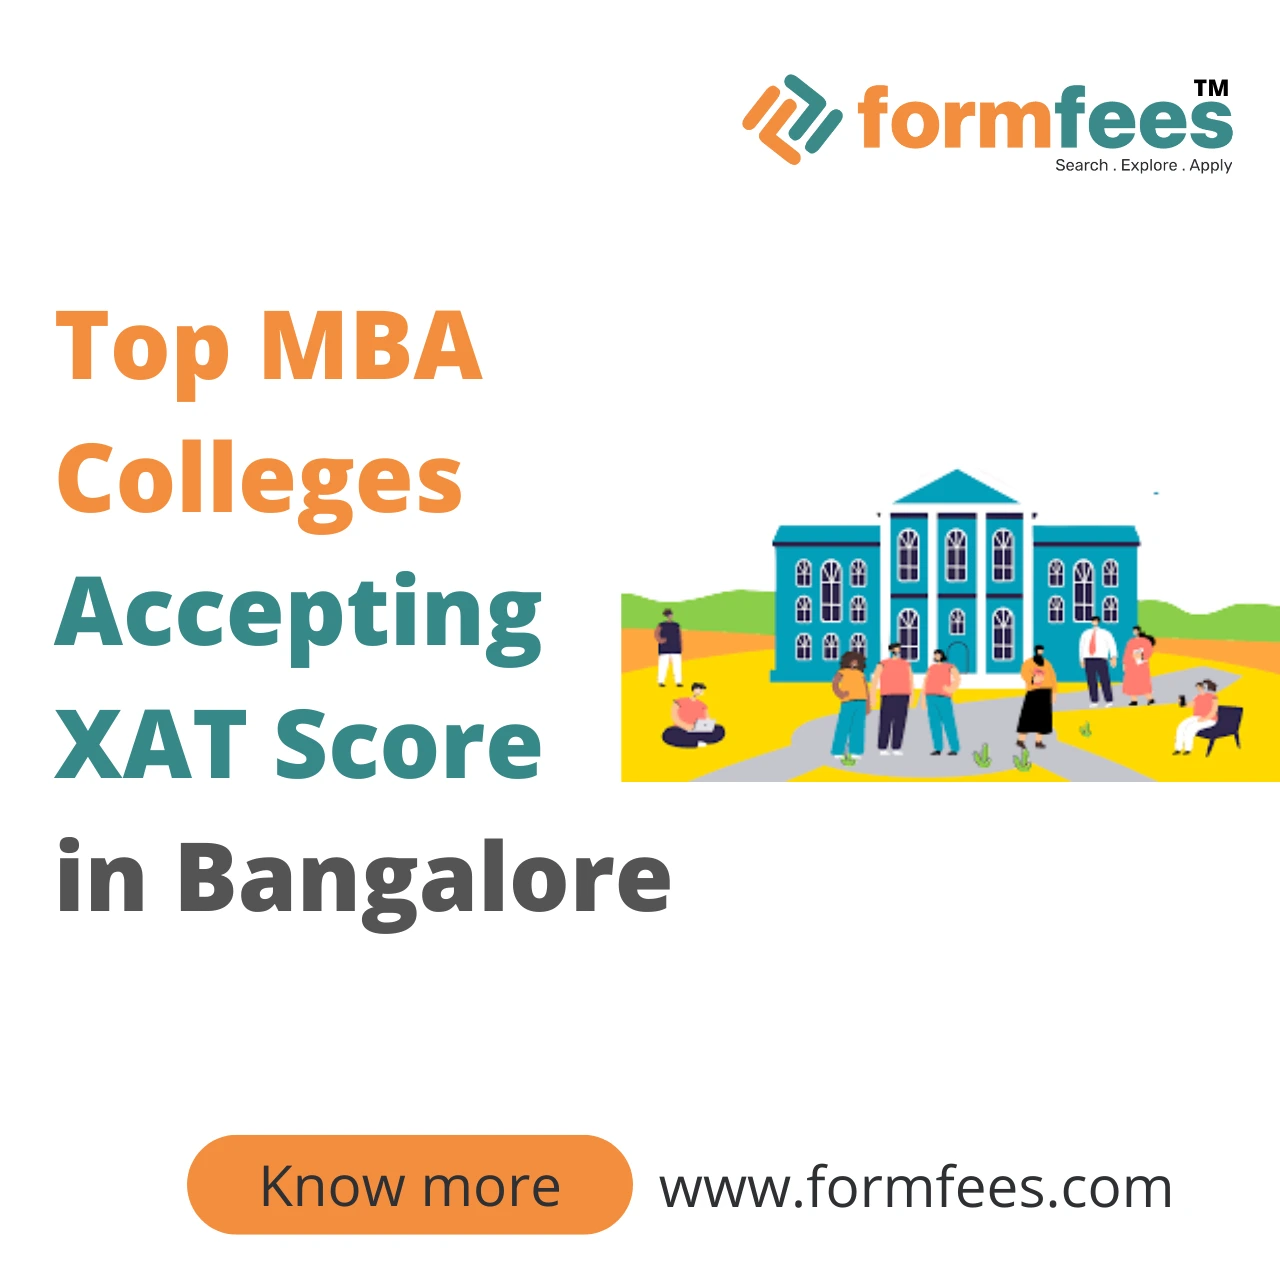 Top MBA Colleges Accepting XAT Score in Bangalore